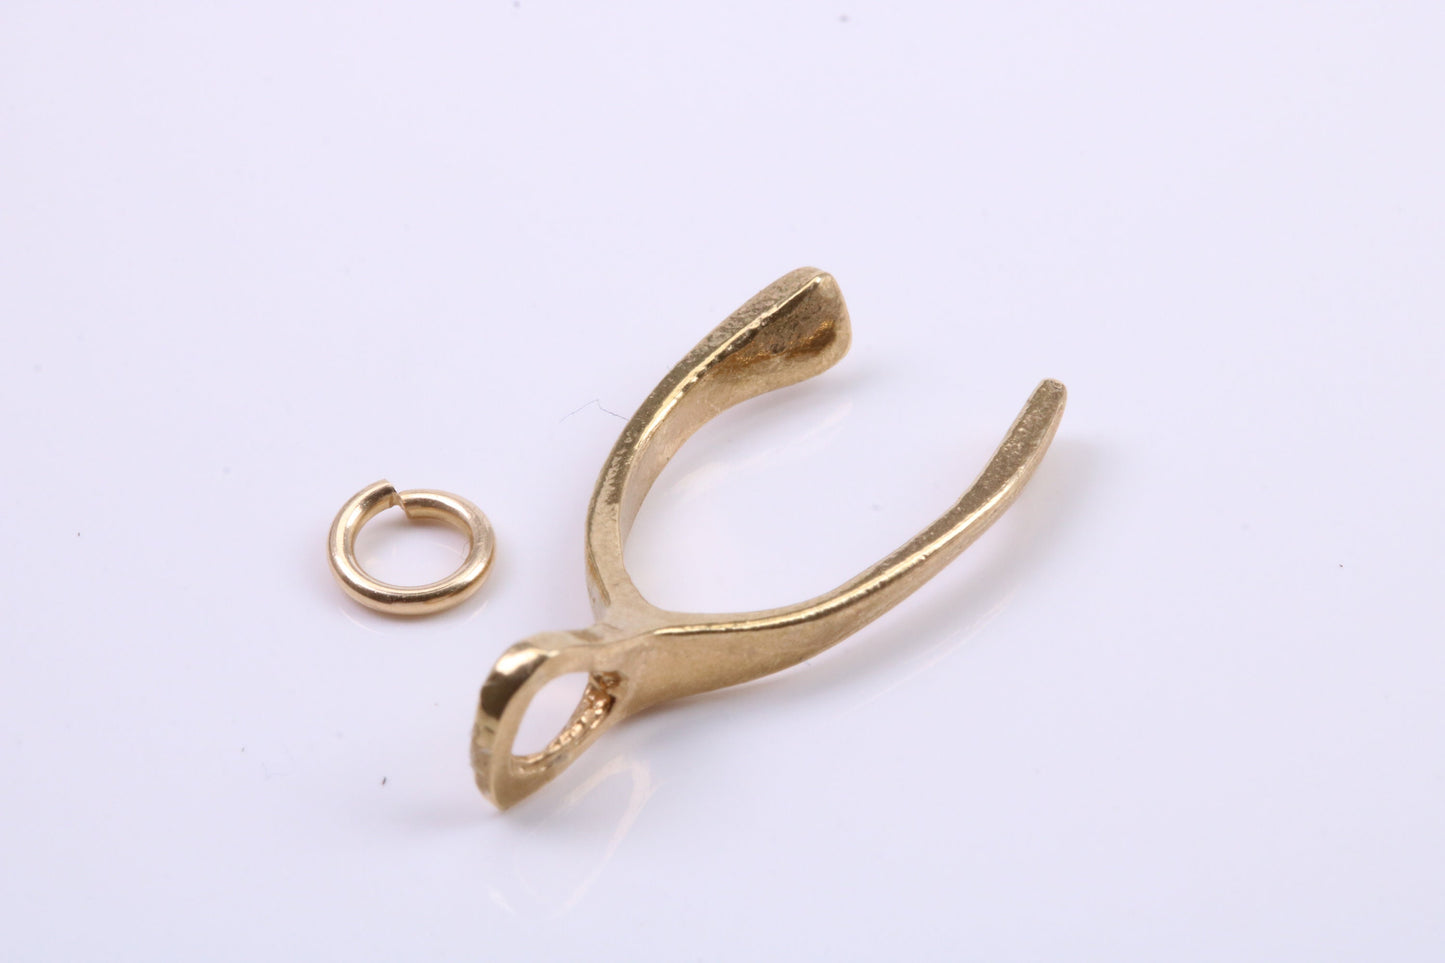 Wish Bone Charm, Traditional Charm, Made from Solid 9ct Yellow Gold, British Hallmarked, Complete with Attachment Link